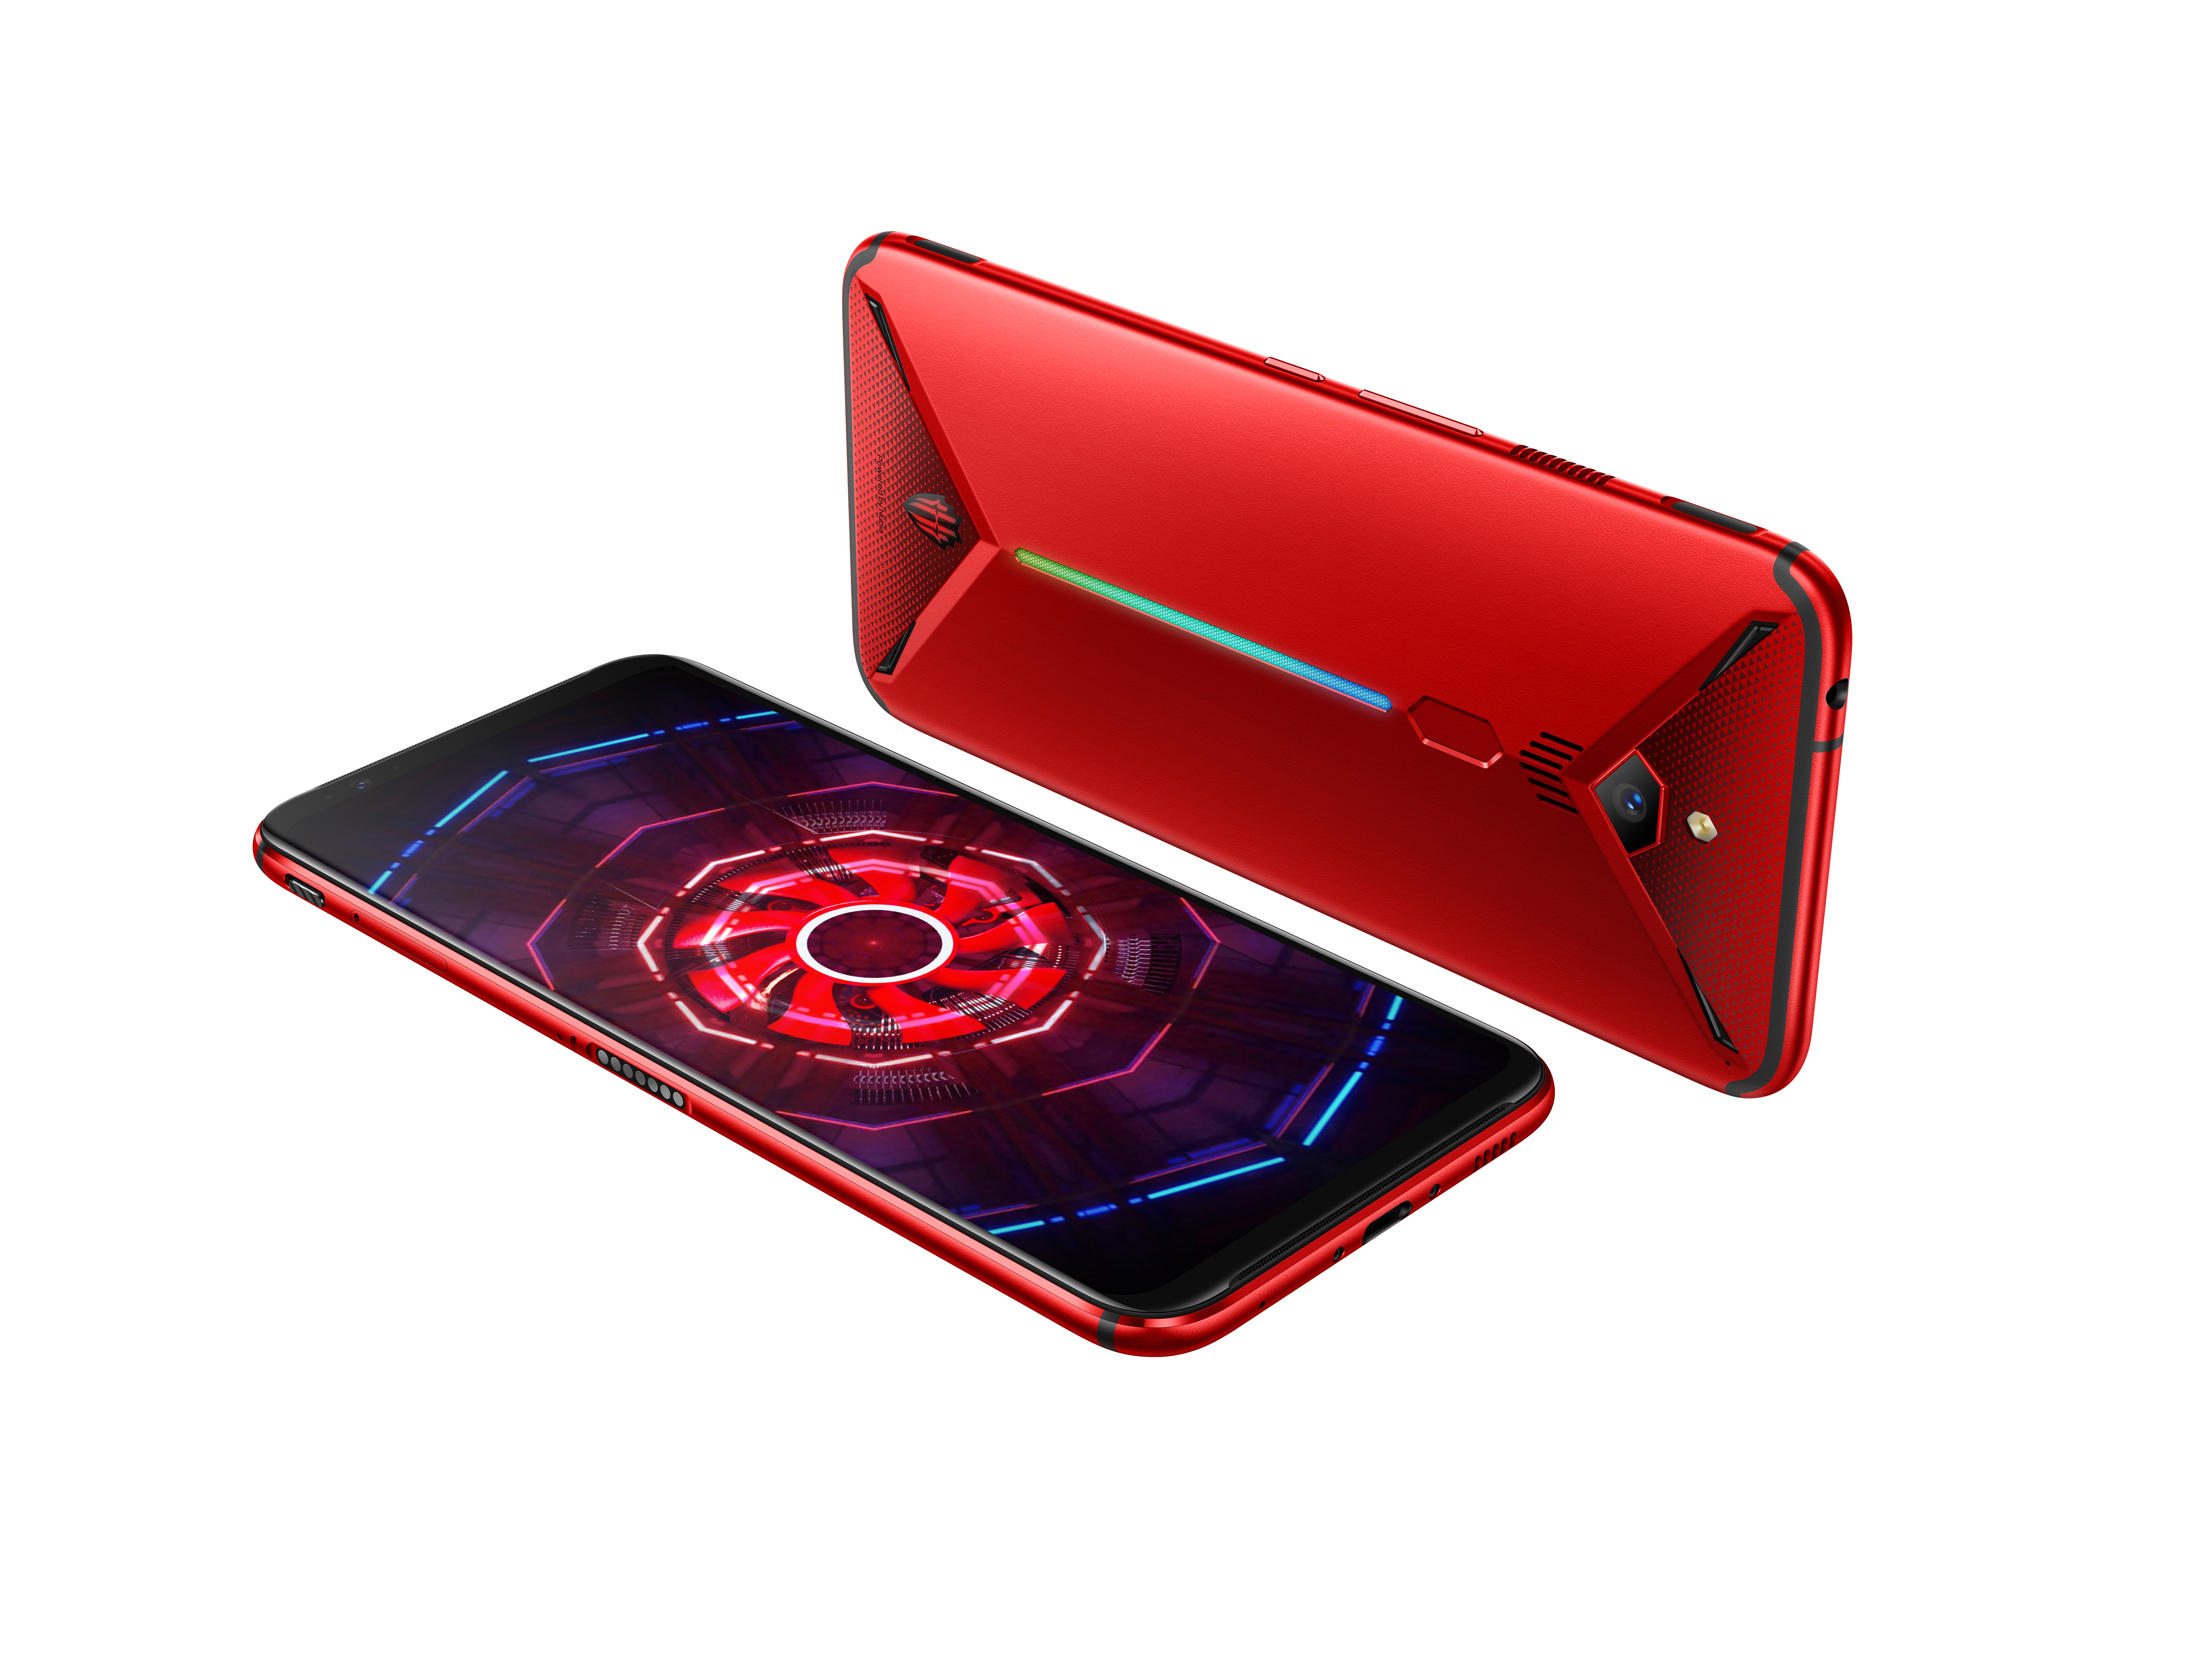 The Nubia Red Magic 3 will be the first smartphone with an internal cooling fan - Nubia&#039;s new U.S. bound gaming handset has a feature never seen before on a phone